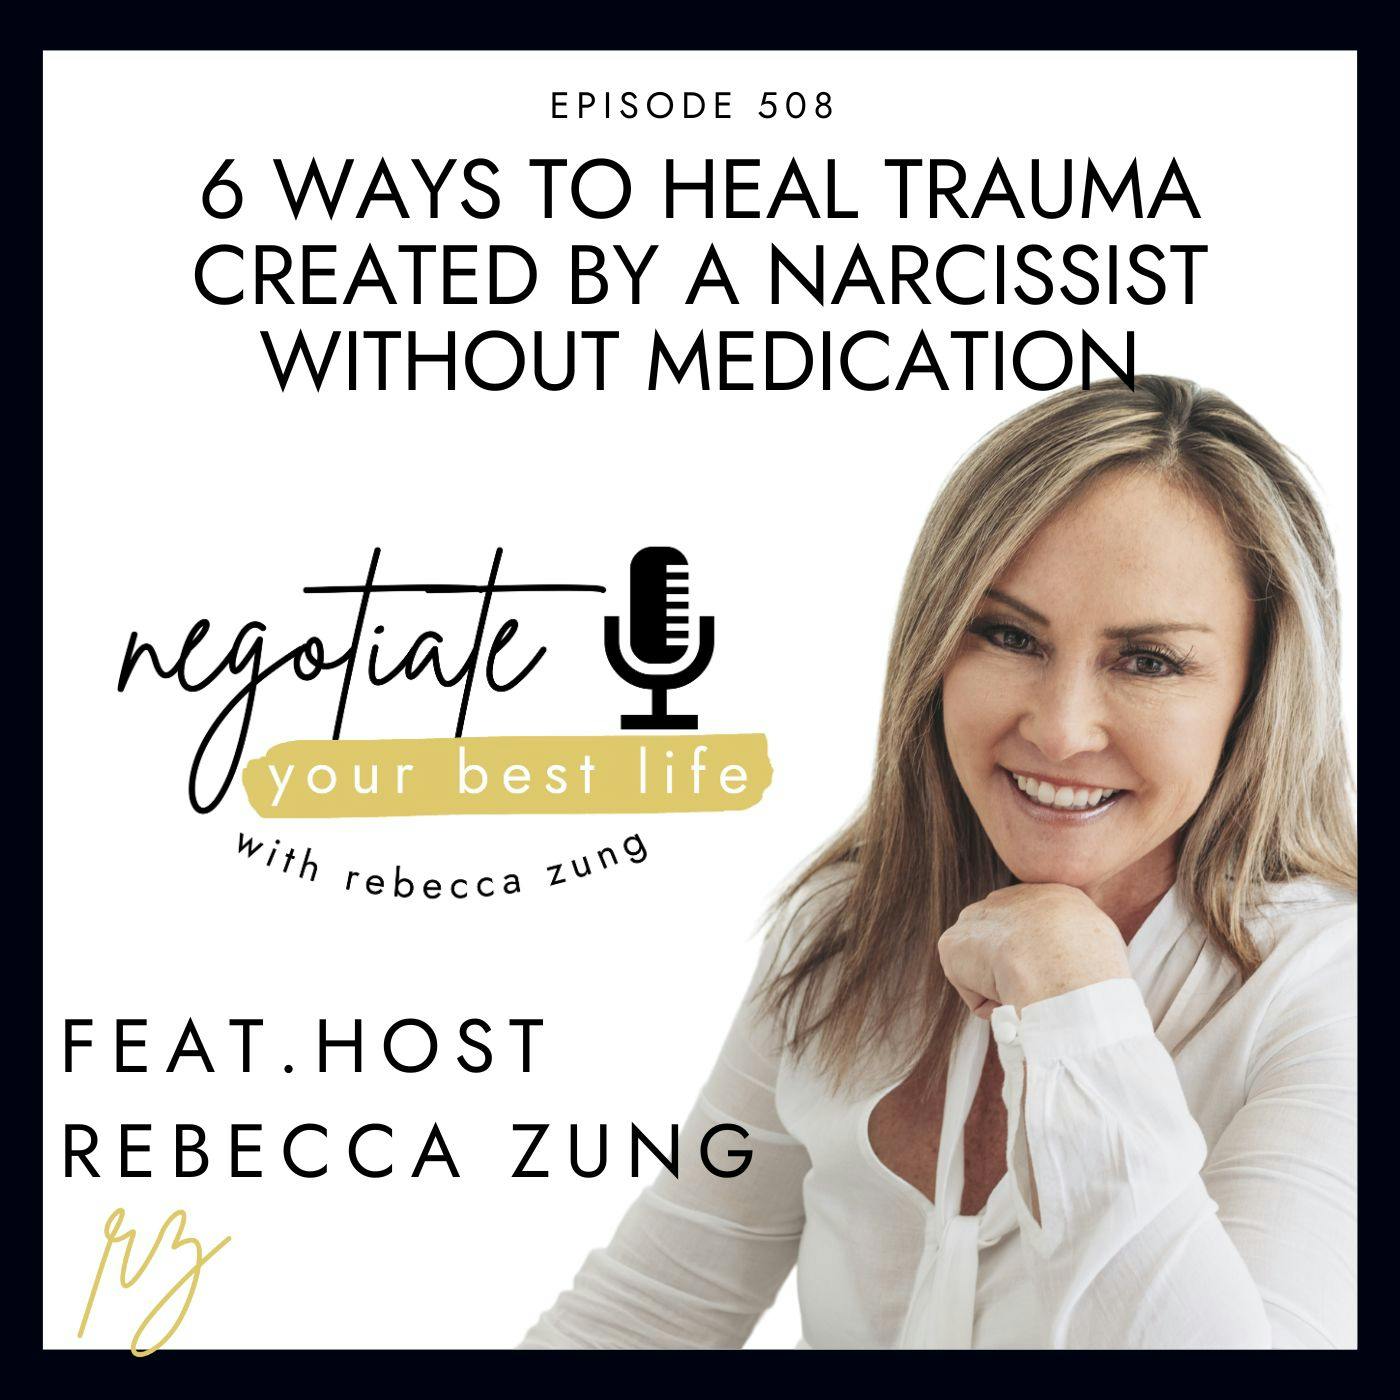 6 Ways To Heal Trauma Created By A Narcissist without Medication with Rebecca Zung on Negotiate Your Best Life #508